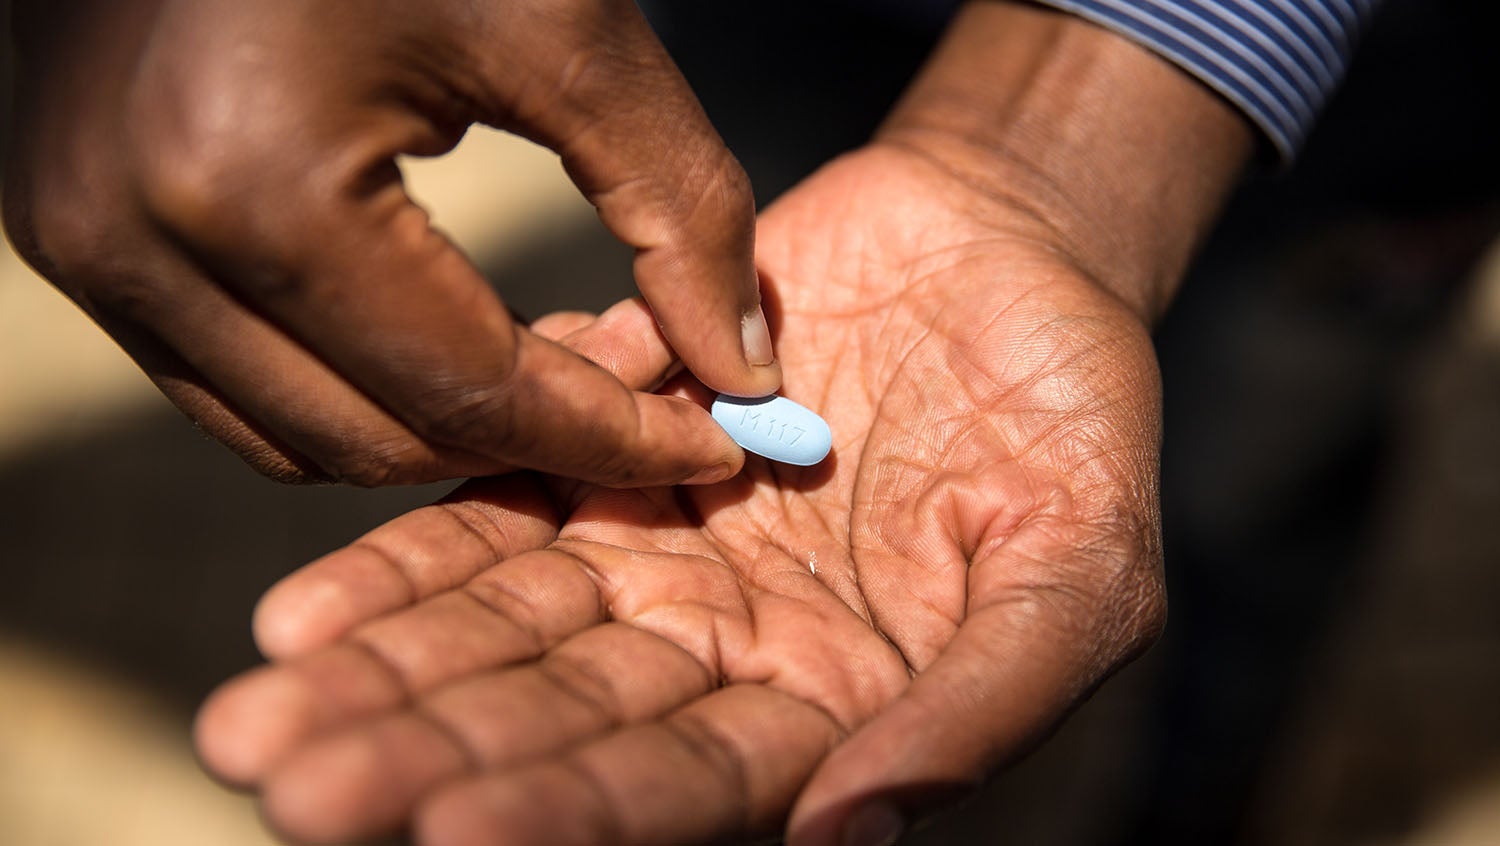 hiv prep medication in a mans hand